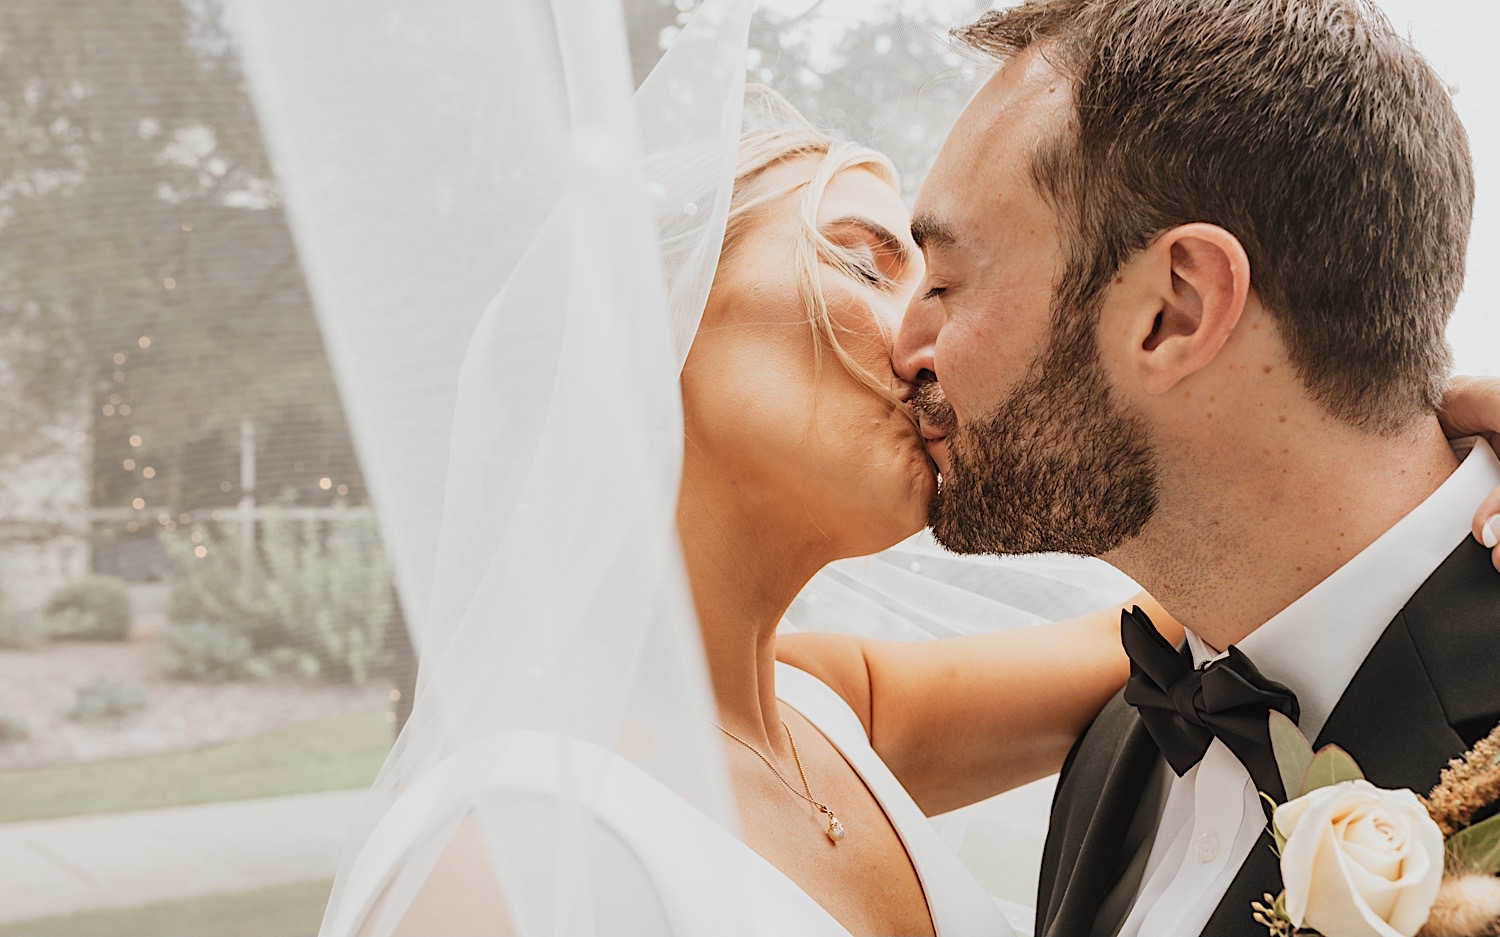 Close up photo of a bride and groom kissing one another as the bride's veil flows in the wind